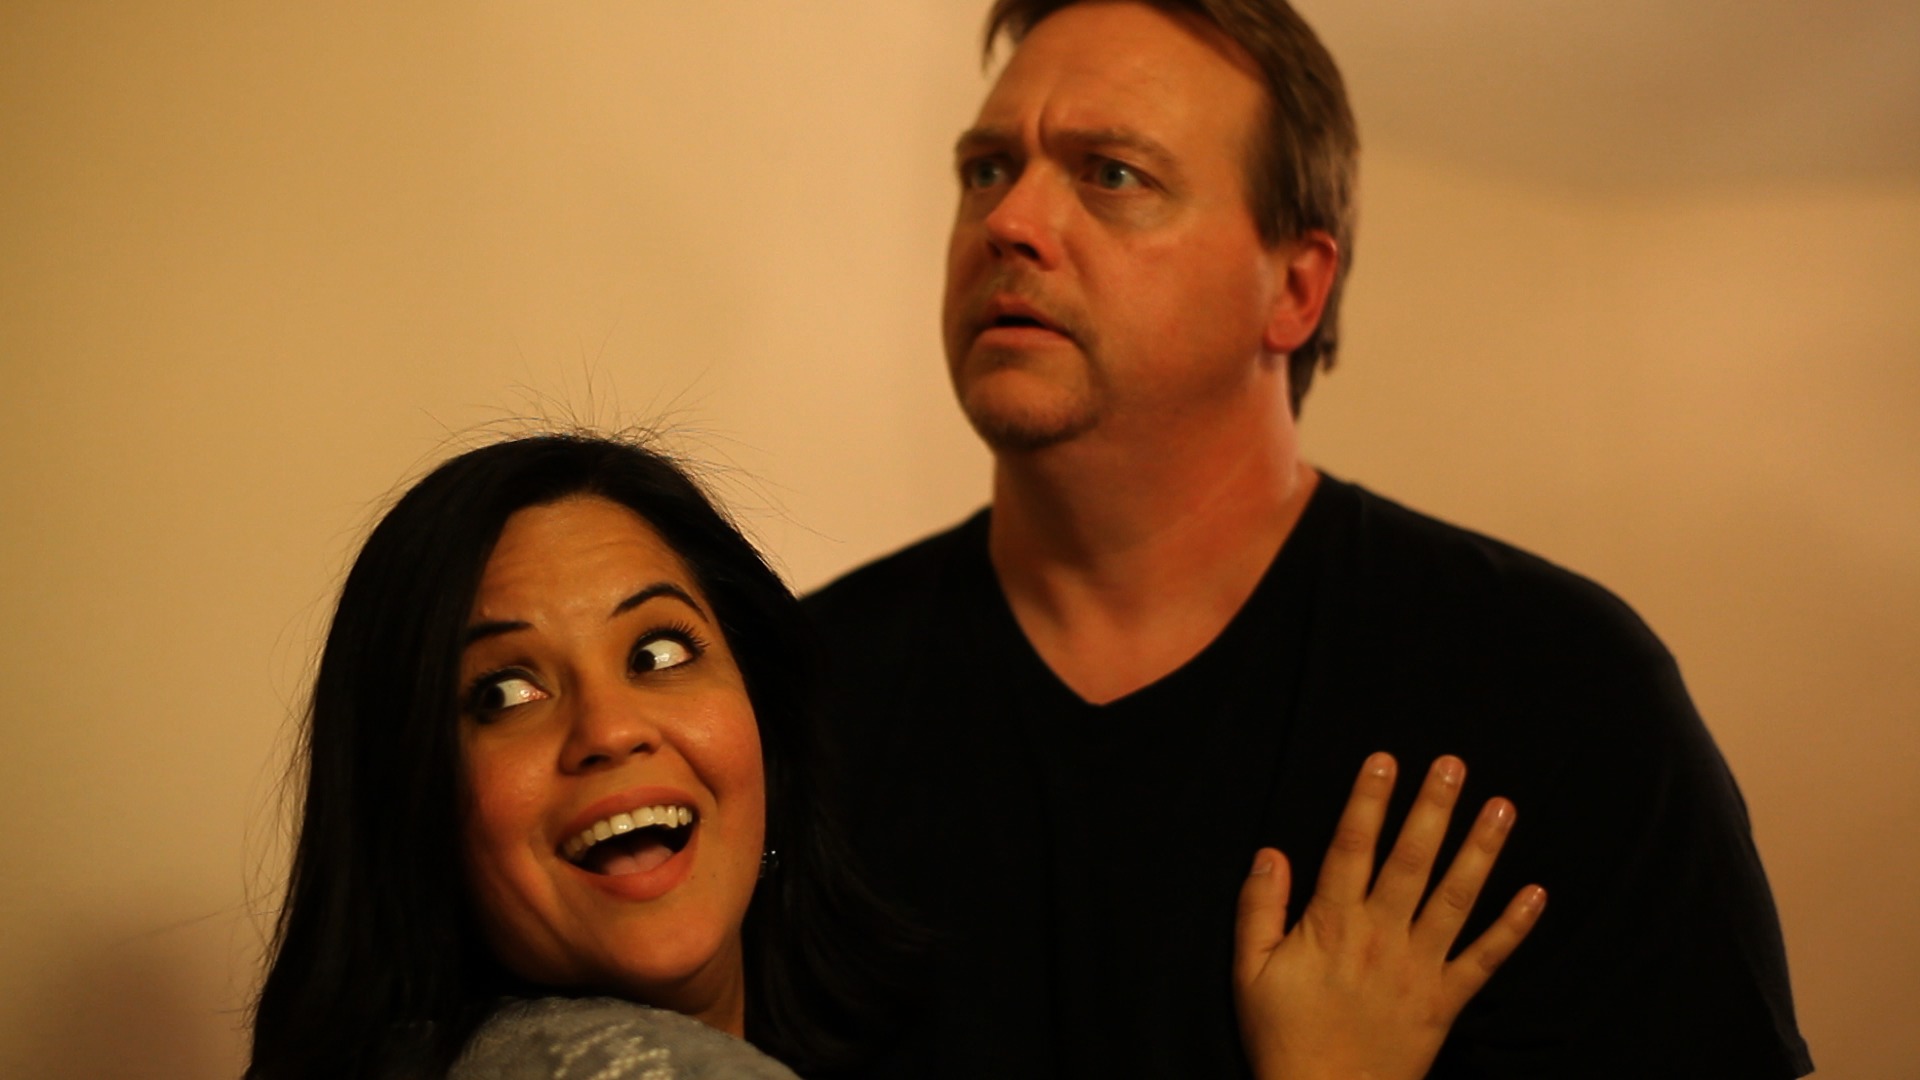 Steven Michael Hall with Susie Cruz from the sitcom 